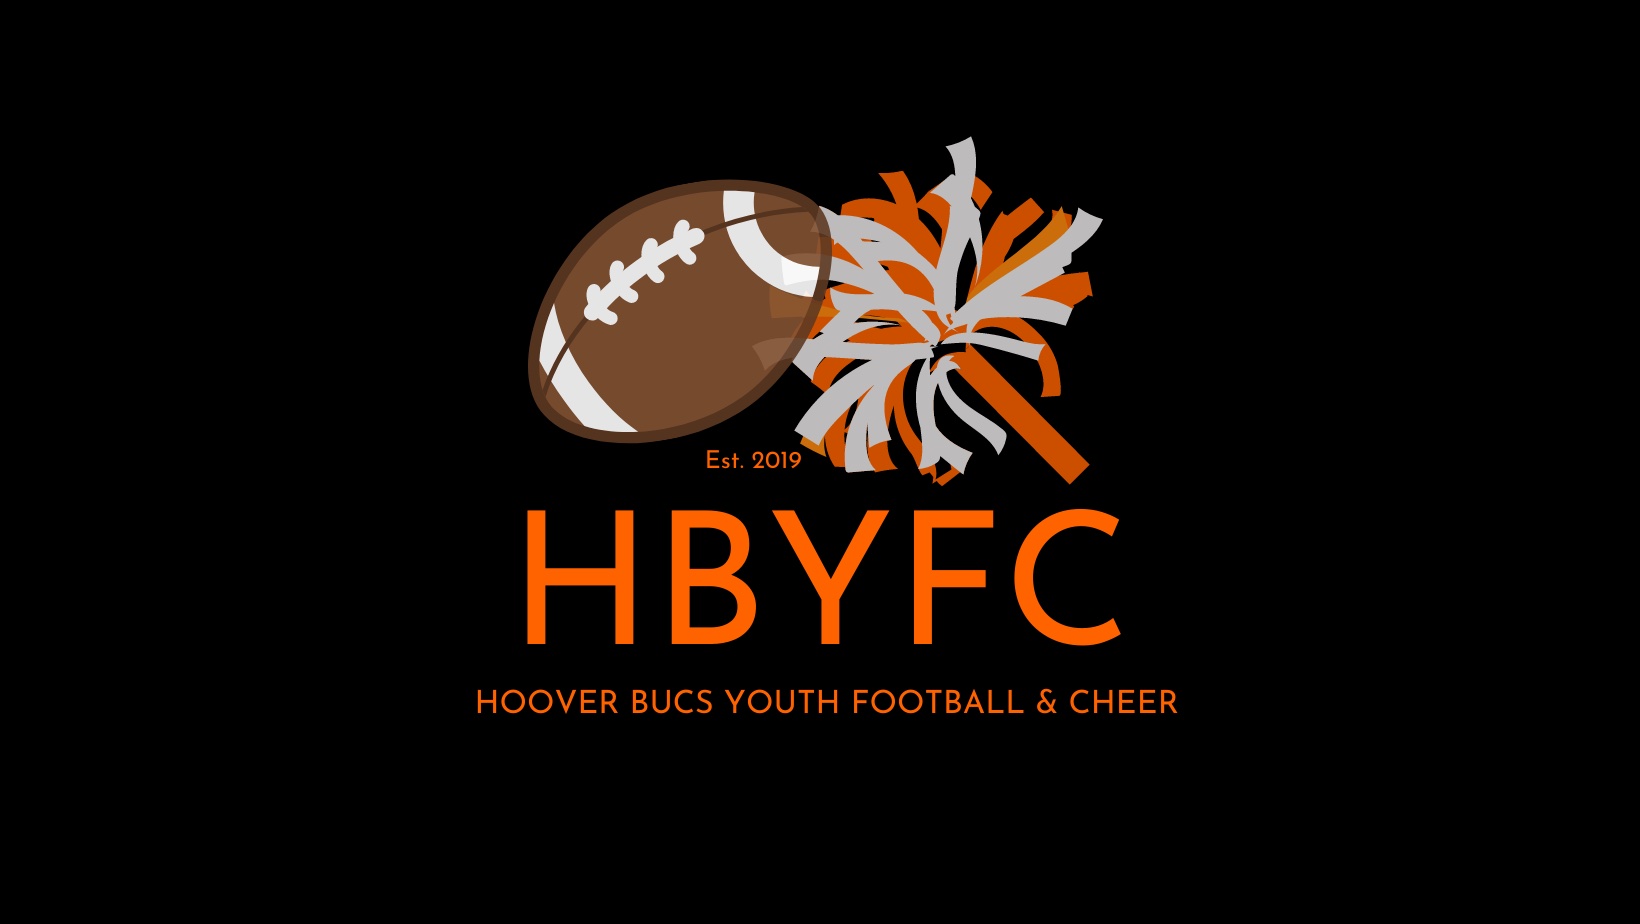 Hoover BUCS Youth Football and Cheer